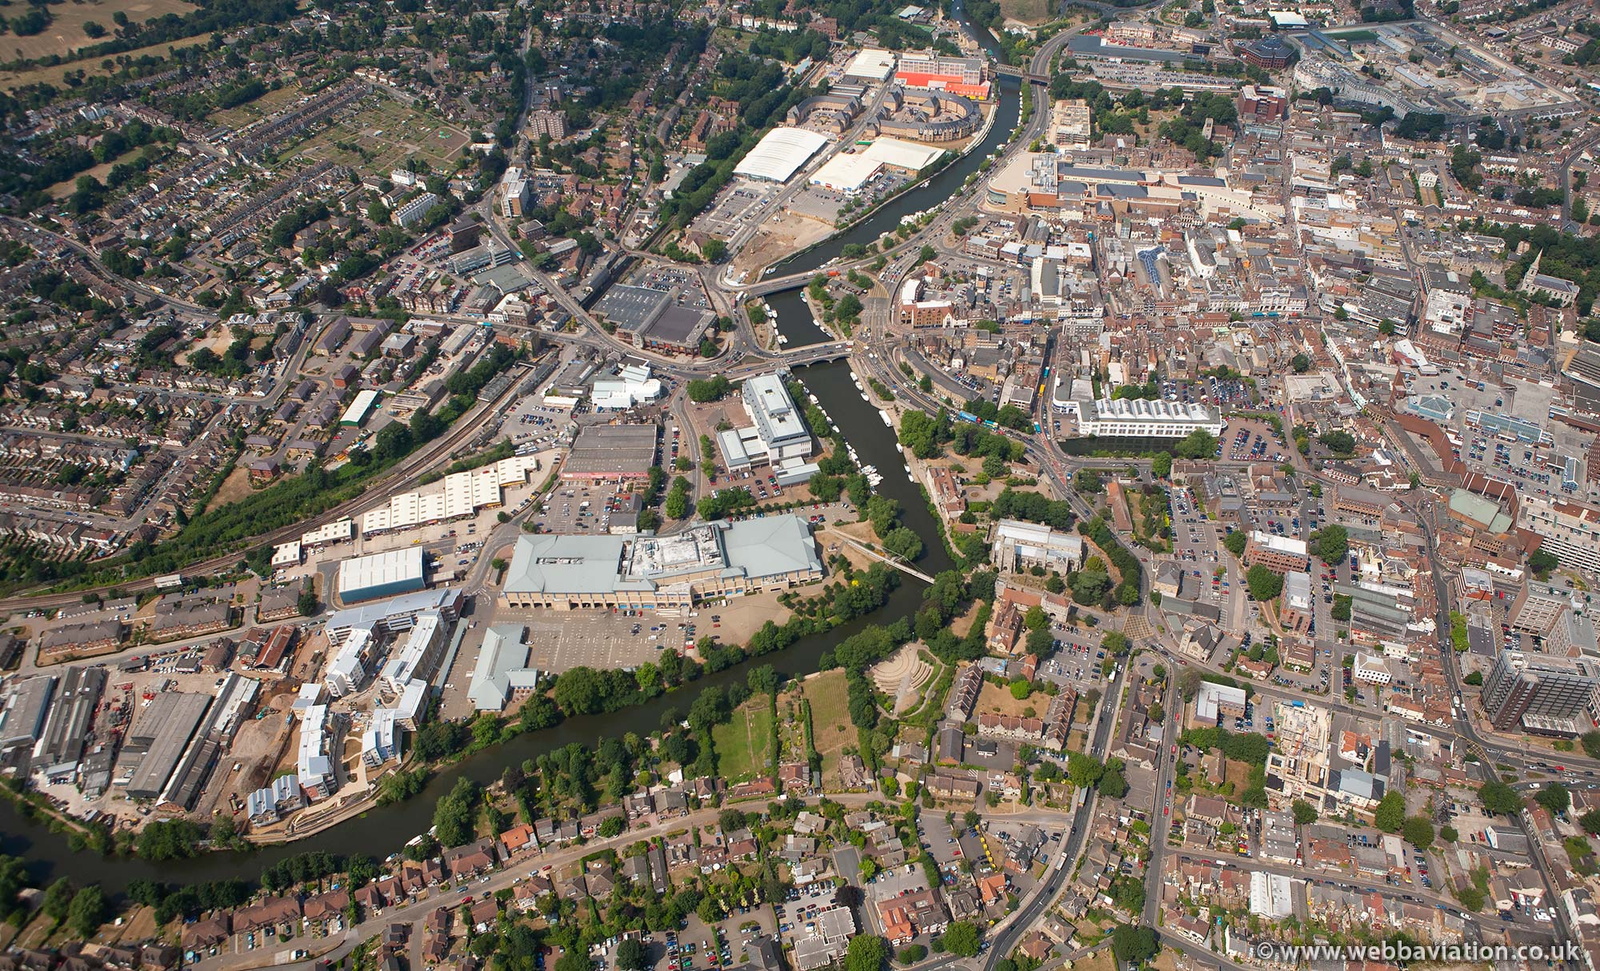 River Medway flowing through Maidstone  from the air